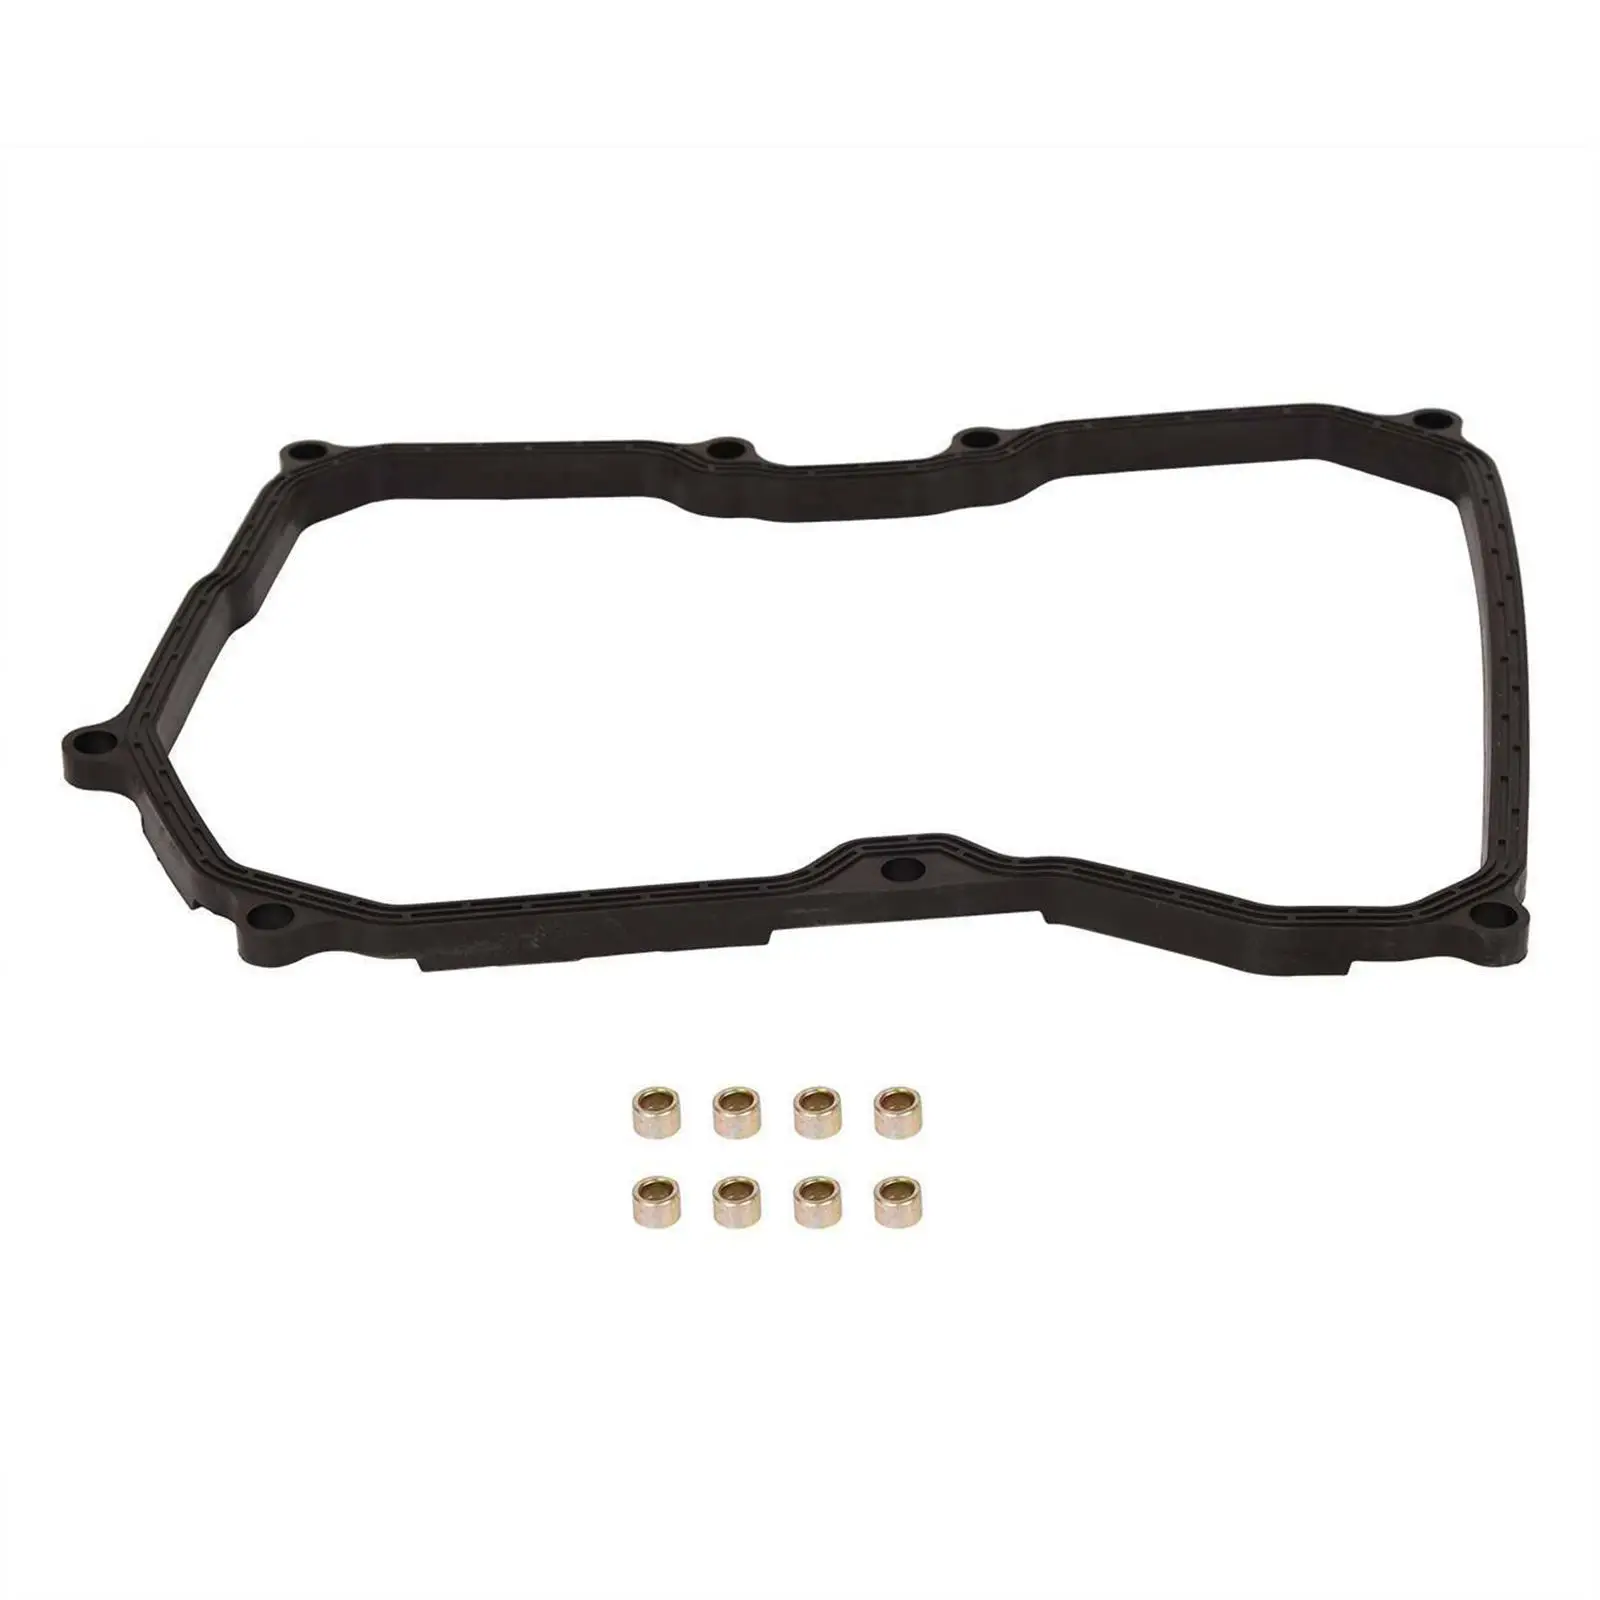 Transmission Pan Gasket Lightweight for Mini 2007+ Spare Parts Replace